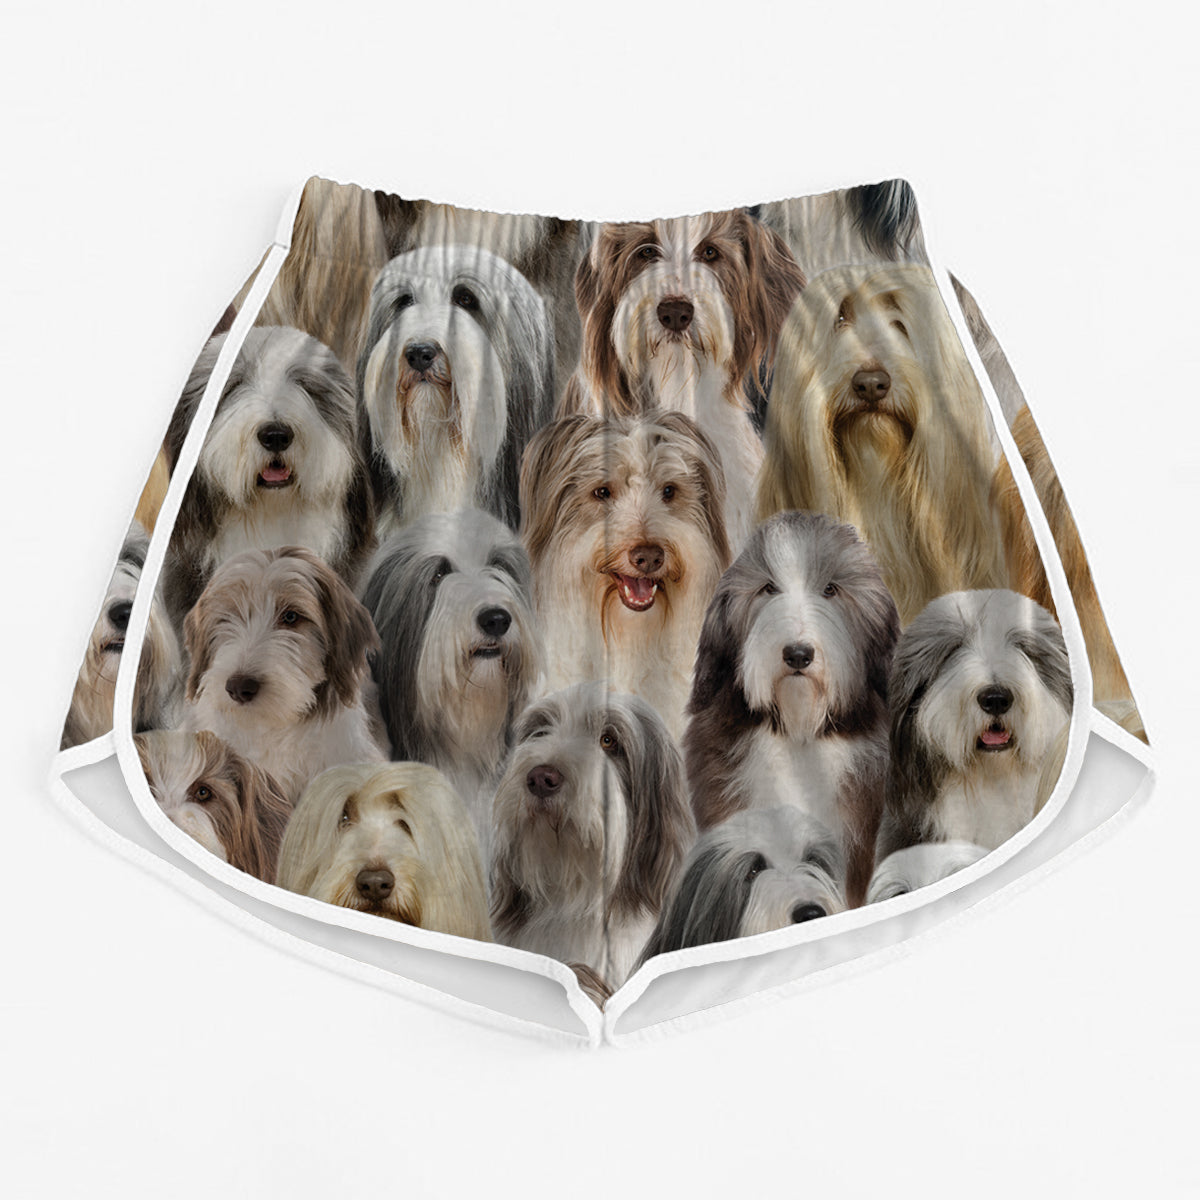 You Will Have A Bunch Of Bearded Collies - Women's Running Shorts V1